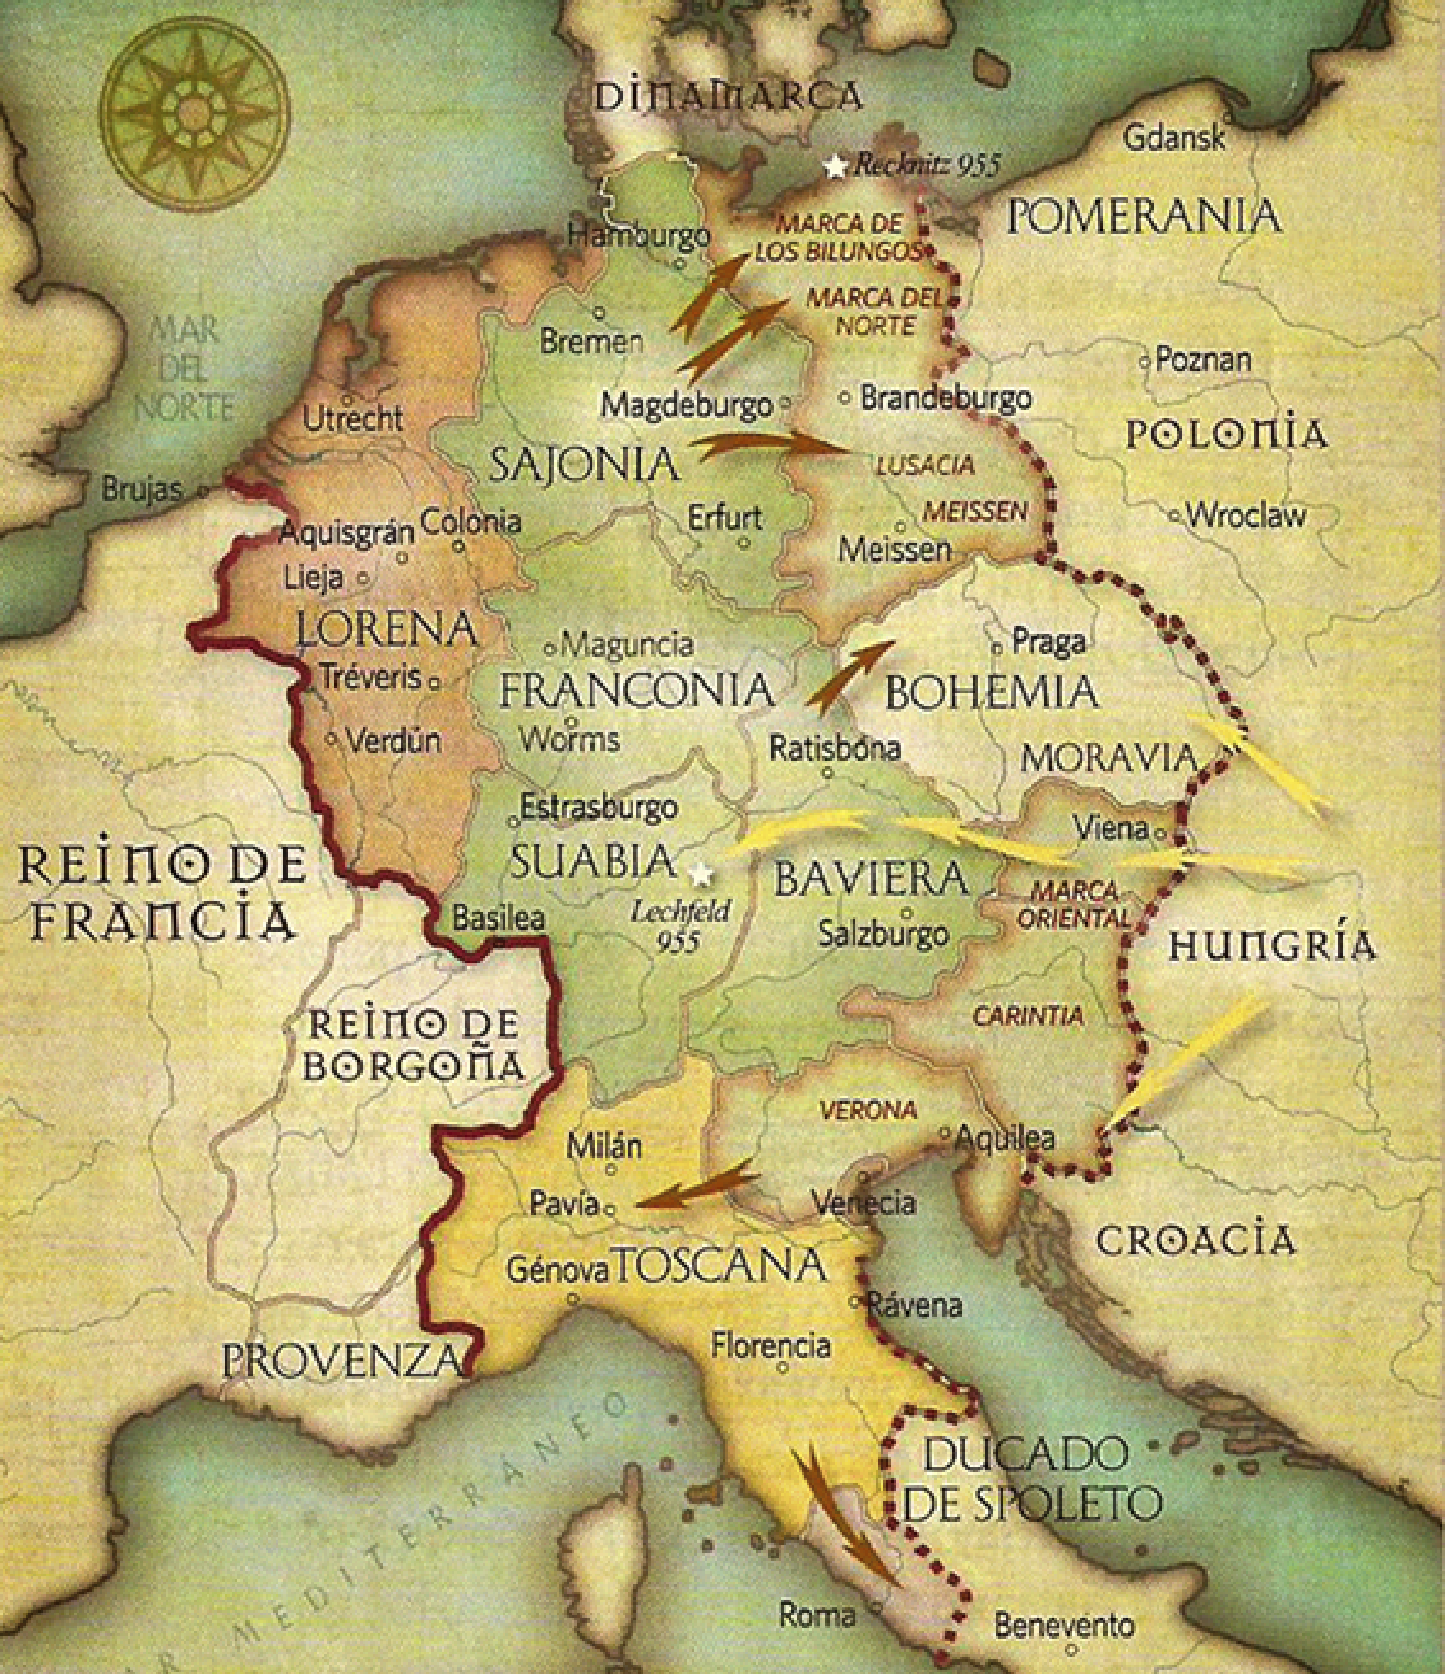 https://imagenes.arrecaballo.es/wp-content/uploads/2022/03/imperio-germanico-siglo-x.png 1445w, https://imagenes.arrecaballo.es/wp-content/uploads/2022/03/imperio-germanico-siglo-x-259x300.png 259w, https://imagenes.arrecaballo.es/wp-content/uploads/2022/03/imperio-germanico-siglo-x-884x1024.png 884w, https://imagenes.arrecaballo.es/wp-content/uploads/2022/03/imperio-germanico-siglo-x-768x890.png 768w, https://imagenes.arrecaballo.es/wp-content/uploads/2022/03/imperio-germanico-siglo-x-1326x1536.png 1326w, https://imagenes.arrecaballo.es/wp-content/uploads/2022/03/imperio-germanico-siglo-x-100x116.png 100w